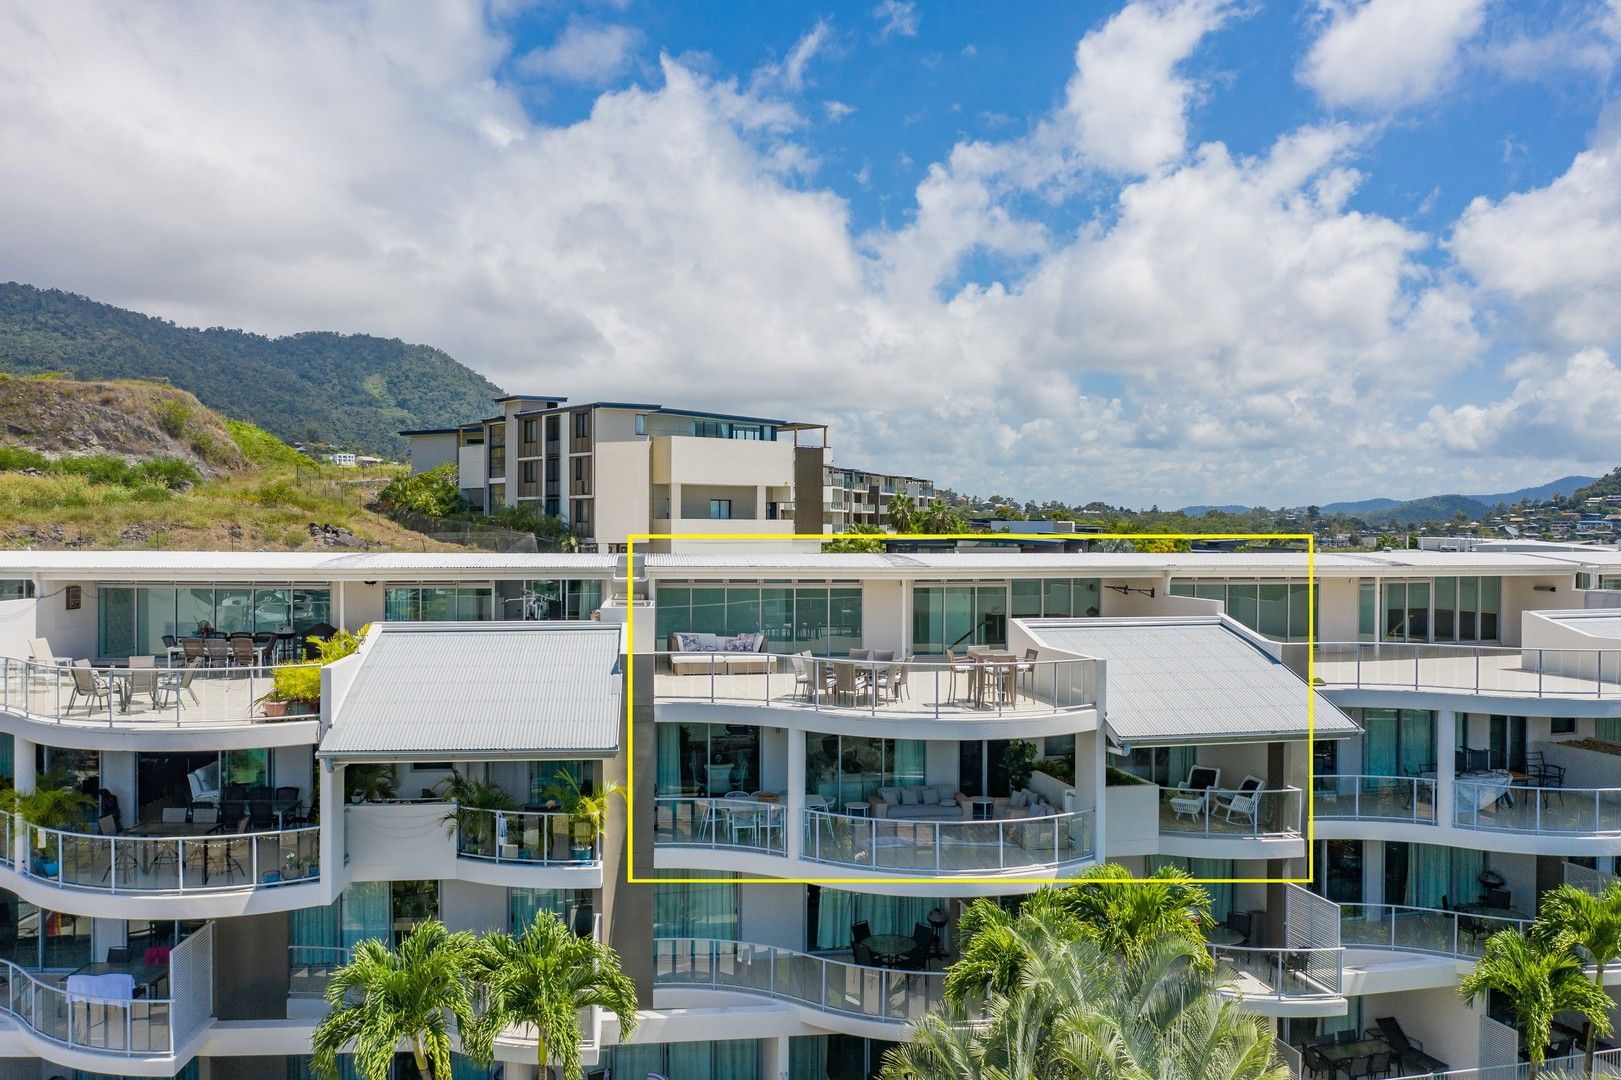 26/159 Shingley Drive, Airlie Beach QLD 4802, Image 0